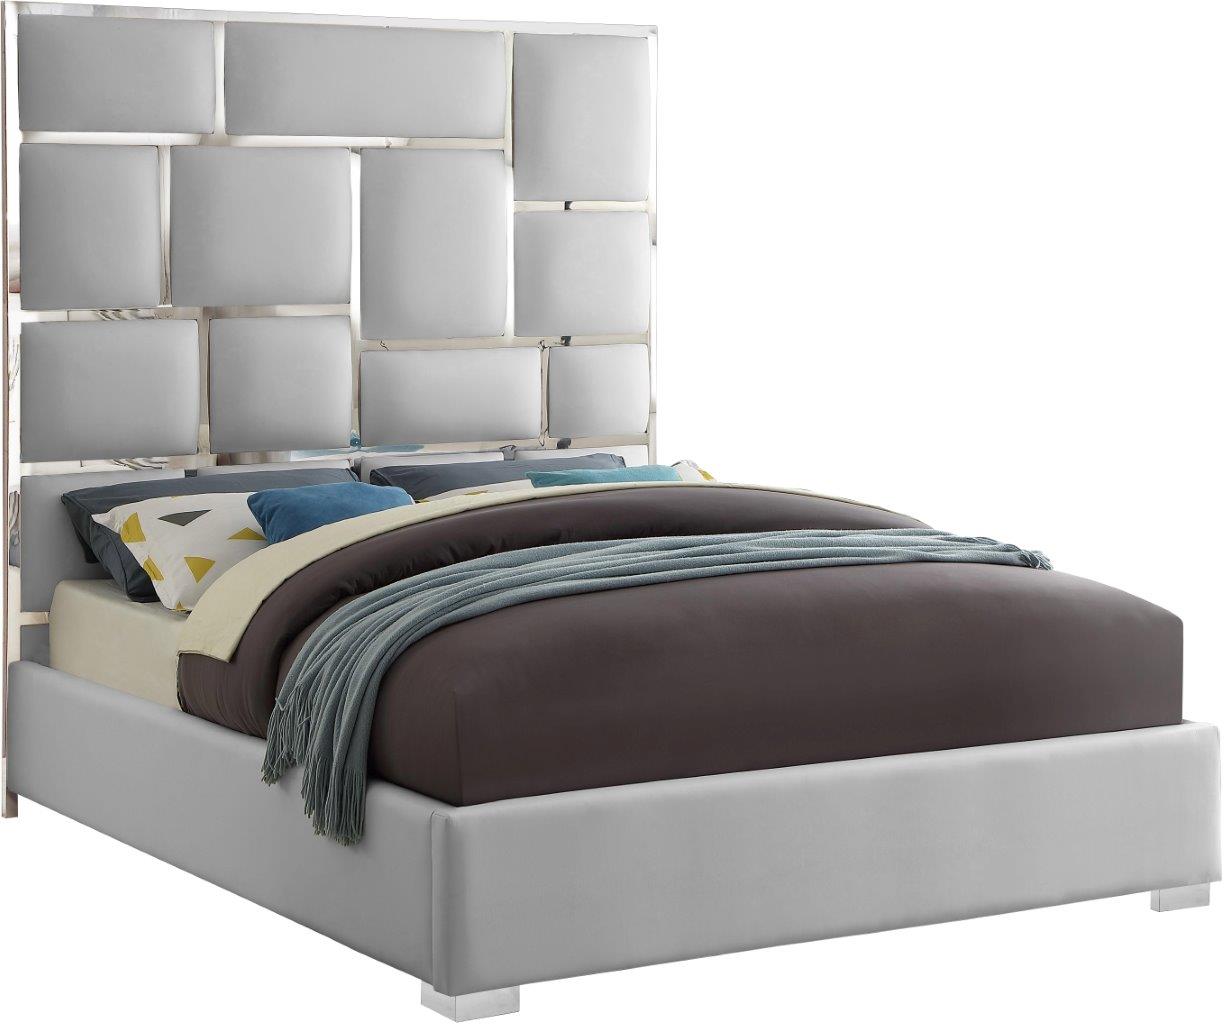 Milan White Faux Leather Queen Bed, White Queen Leather Bed